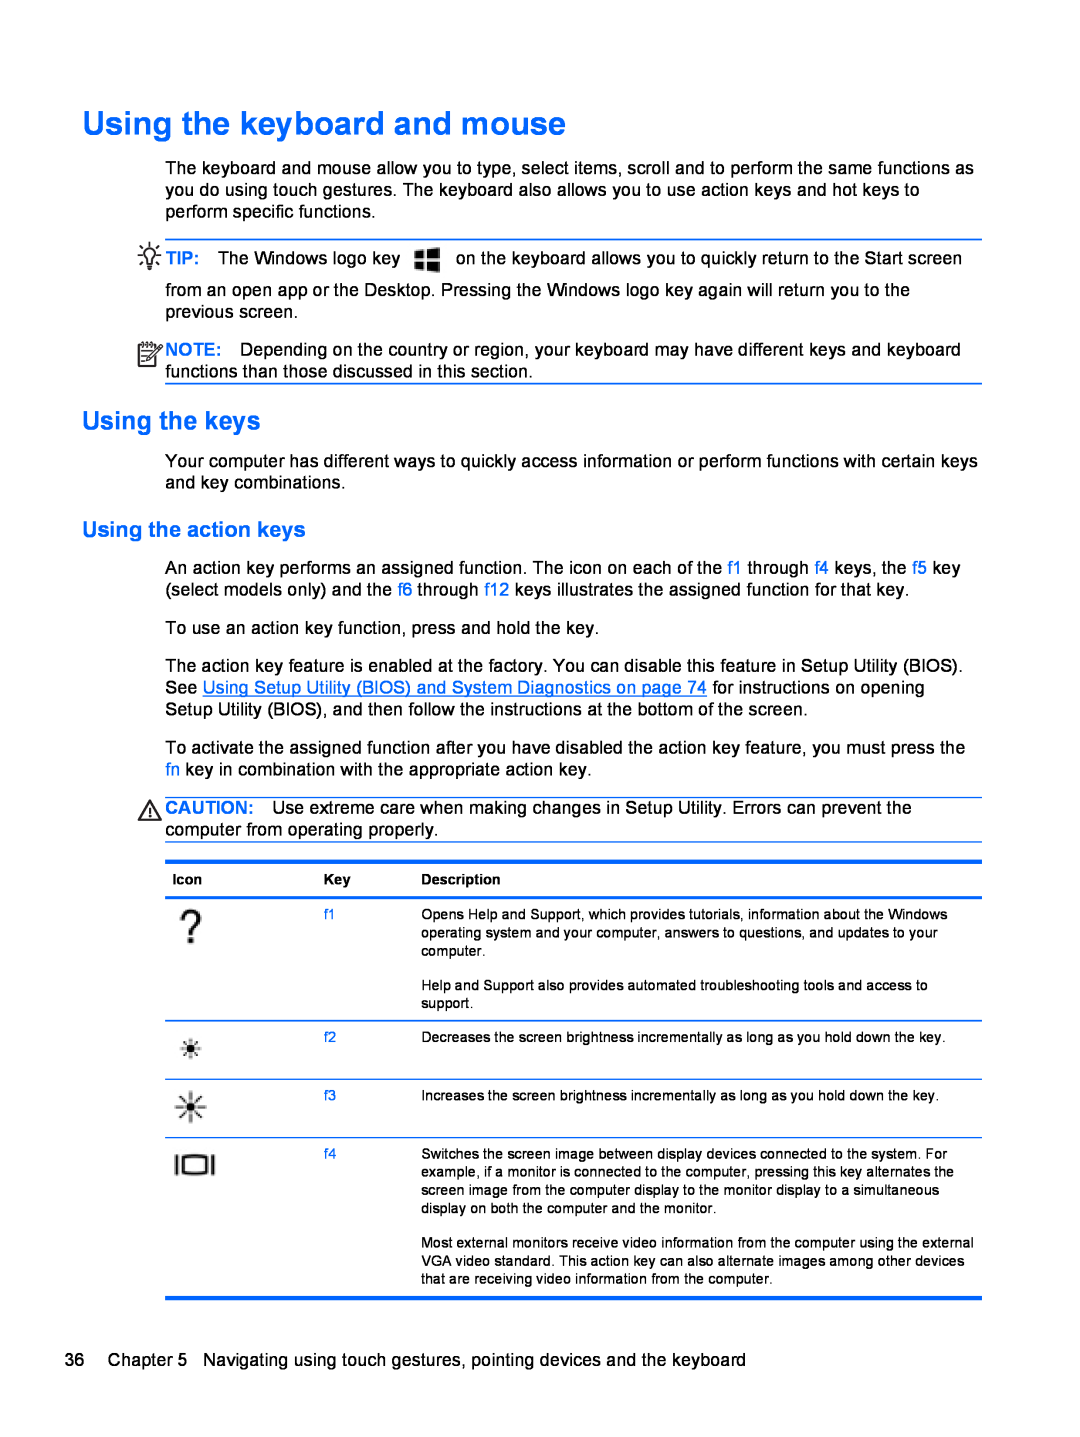 HP C2M17UA#ABA, C7S02UA#ABA, C2L36UA#ABA manual Using the keyboard and mouse, Using the keys, Using the action keys 